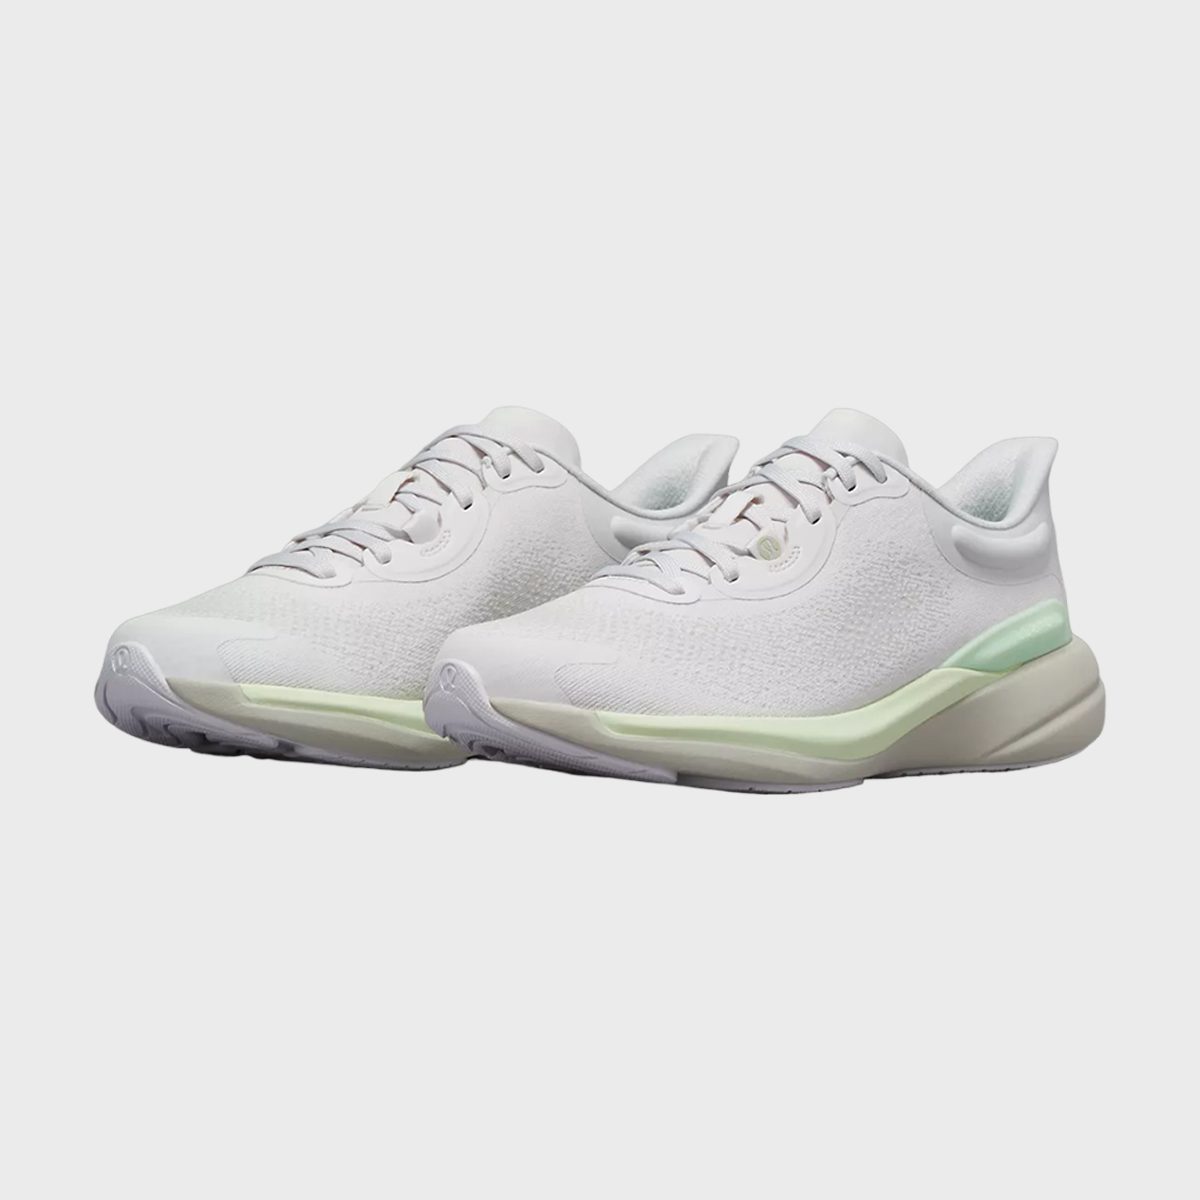 <p>These <a href="https://shop.lululemon.com/p/shoes/W-Chargefeel-Workout-Low-2/_/prod11500242" rel="noopener noreferrer">stylish Lululemon sneaks</a>, which were recently spotted on Kate Middleton, are super lightweight and ultra supportive. Designed for running or walking, these shoes feature a supportive midfoot frame, flexible, pressure-mapped outsole and stretchy, breathable upper. In addition to tween and <a href="https://www.rd.com/list/gifts-for-teen-girls/">teen girls</a>, these shoes are also a useful gift for runners.</p> <p class="listicle-page__cta-button-shop"><a class="shop-btn" href="https://shop.lululemon.com/p/shoes/W-Chargefeel-Workout-Low-2/_/prod11500242">Shop Now</a></p>